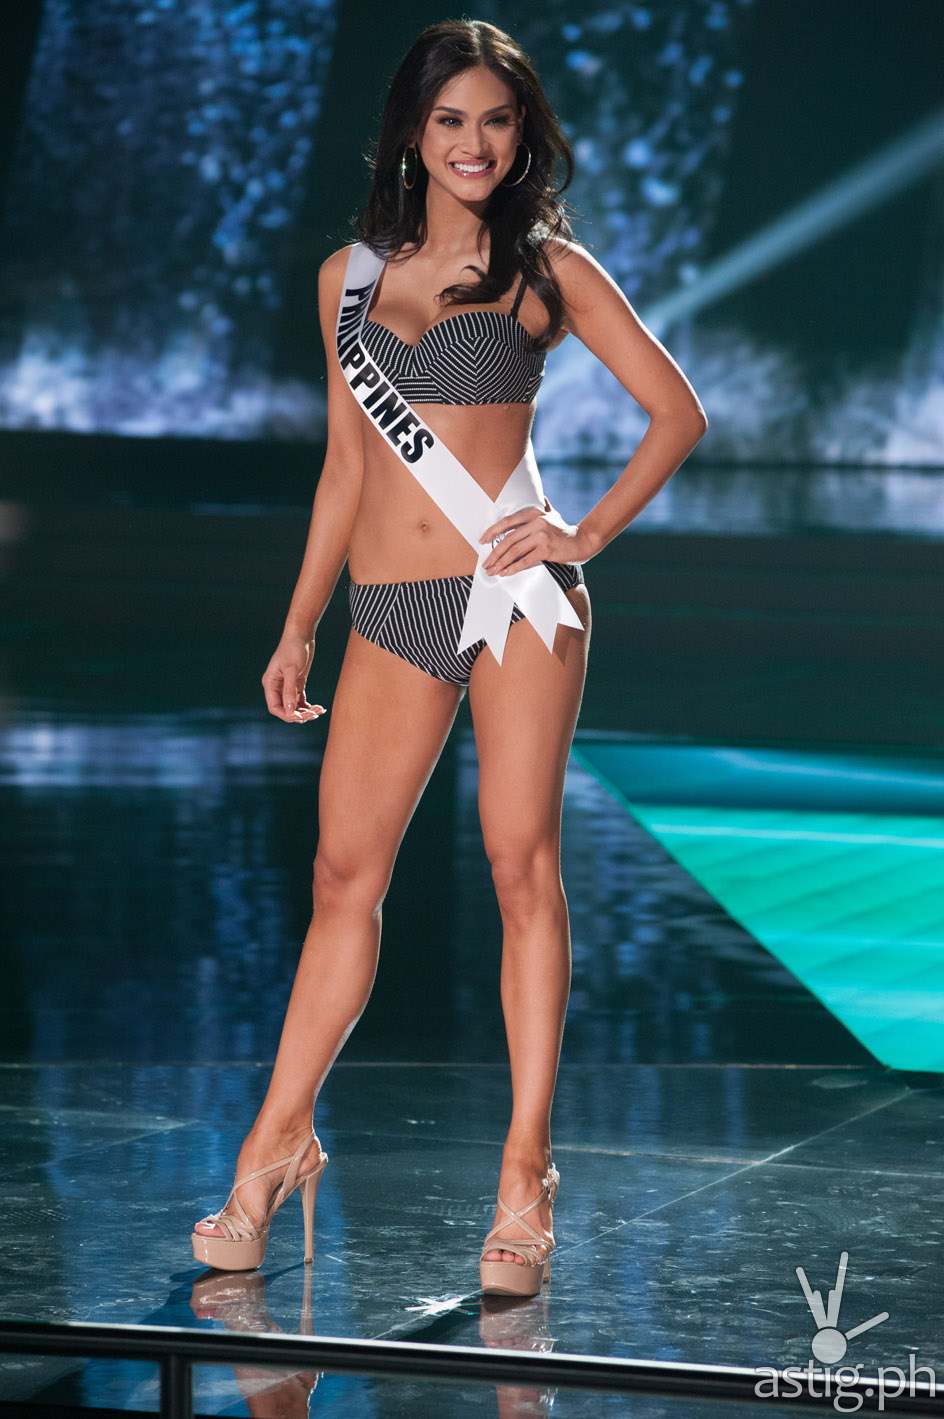 Pia Alonzo Wurtzbach, Miss Philippines 2015 competes on stage in Yamamay swimwear featuring footwear by Chinese Laundry during The 2015 MISS UNIVERSE® Preliminary Show at Planet Hollywood Resort & Casino Wednesday, December 16, 2015. The 2015 Miss Universe contestants are touring, filming, rehearsing and preparing to compete for the DIC Crown in Las Vegas. Tune in to the FOX telecast at 7:00 PM ET live/PT tape-delayed on Sunday, Dec. 20, from Planet Hollywood Resort & Casino in Las Vegas to see who will become Miss Universe 2015. HO/The Miss Universe Organization